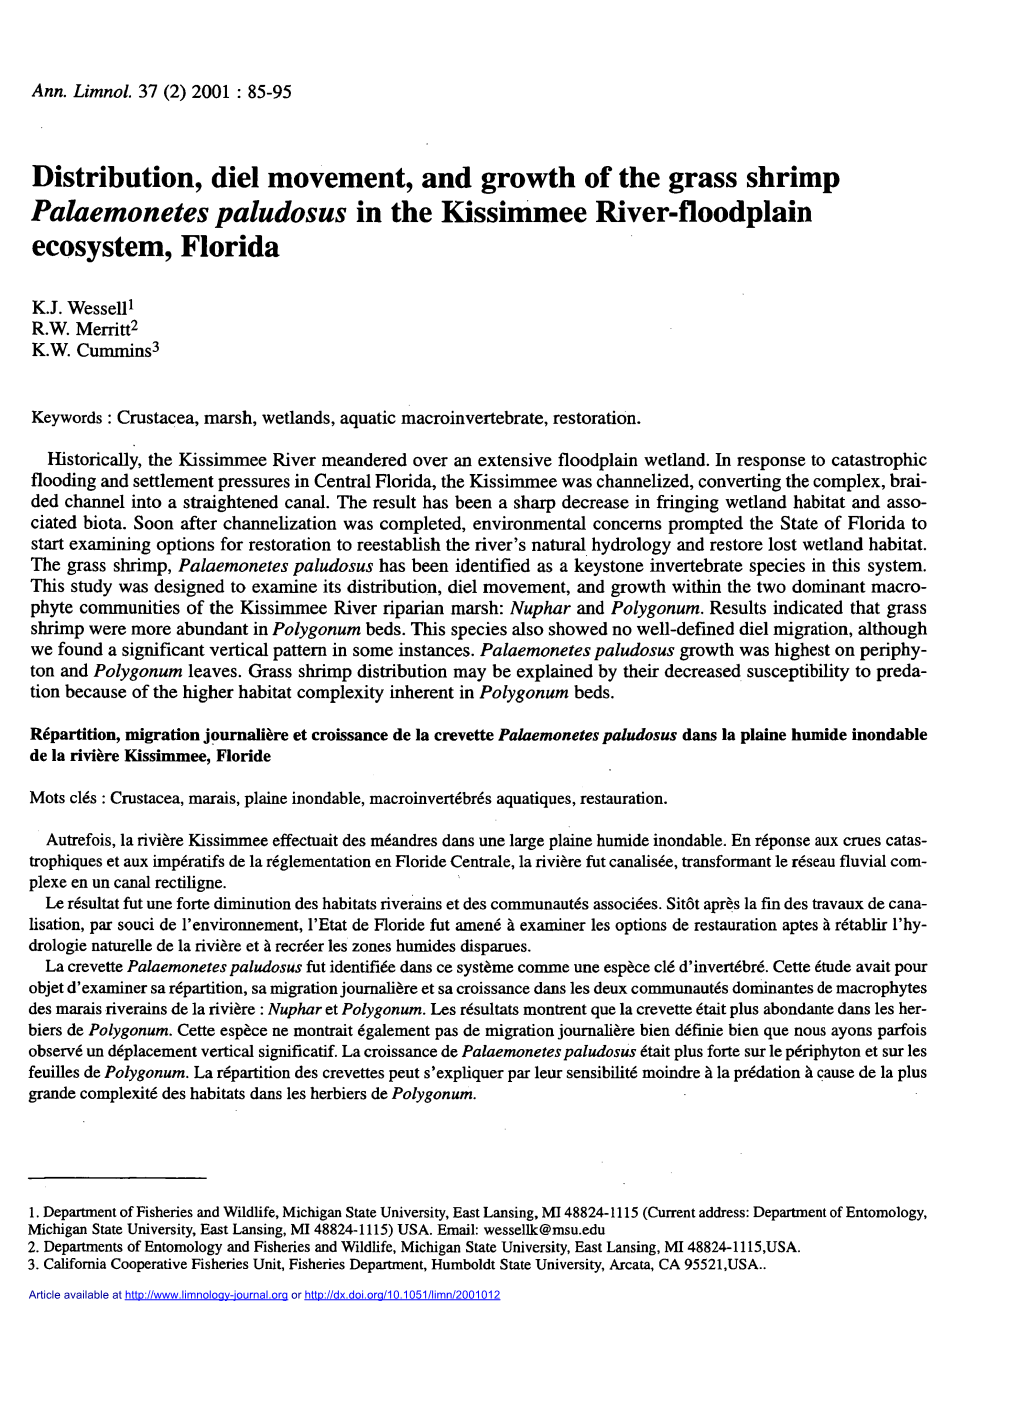 Distribution, Diel Movement, and Growth of the Grass Shrimp Palaemonetes Paludosus in the Kissimmee River-Floodplain Ecosystem, Florida